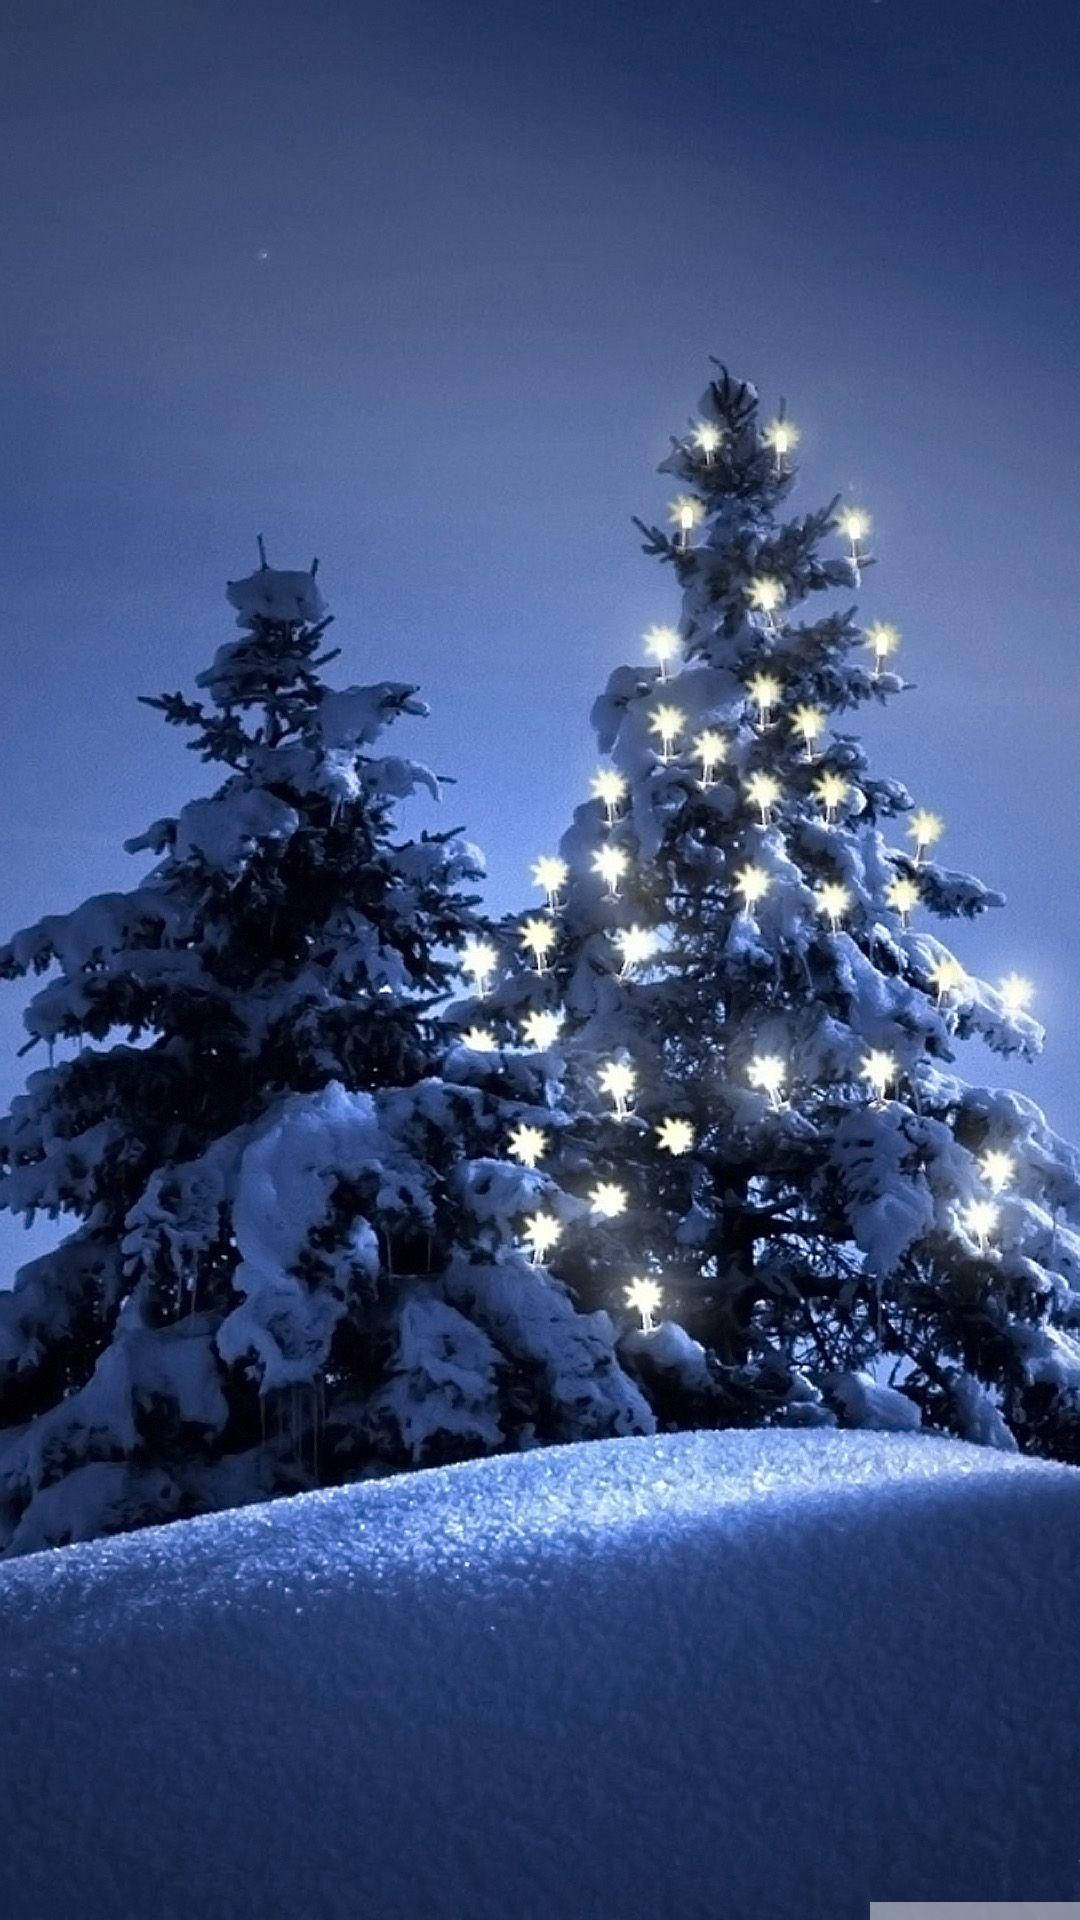 Christmas Trees In The Snow Wallpaper